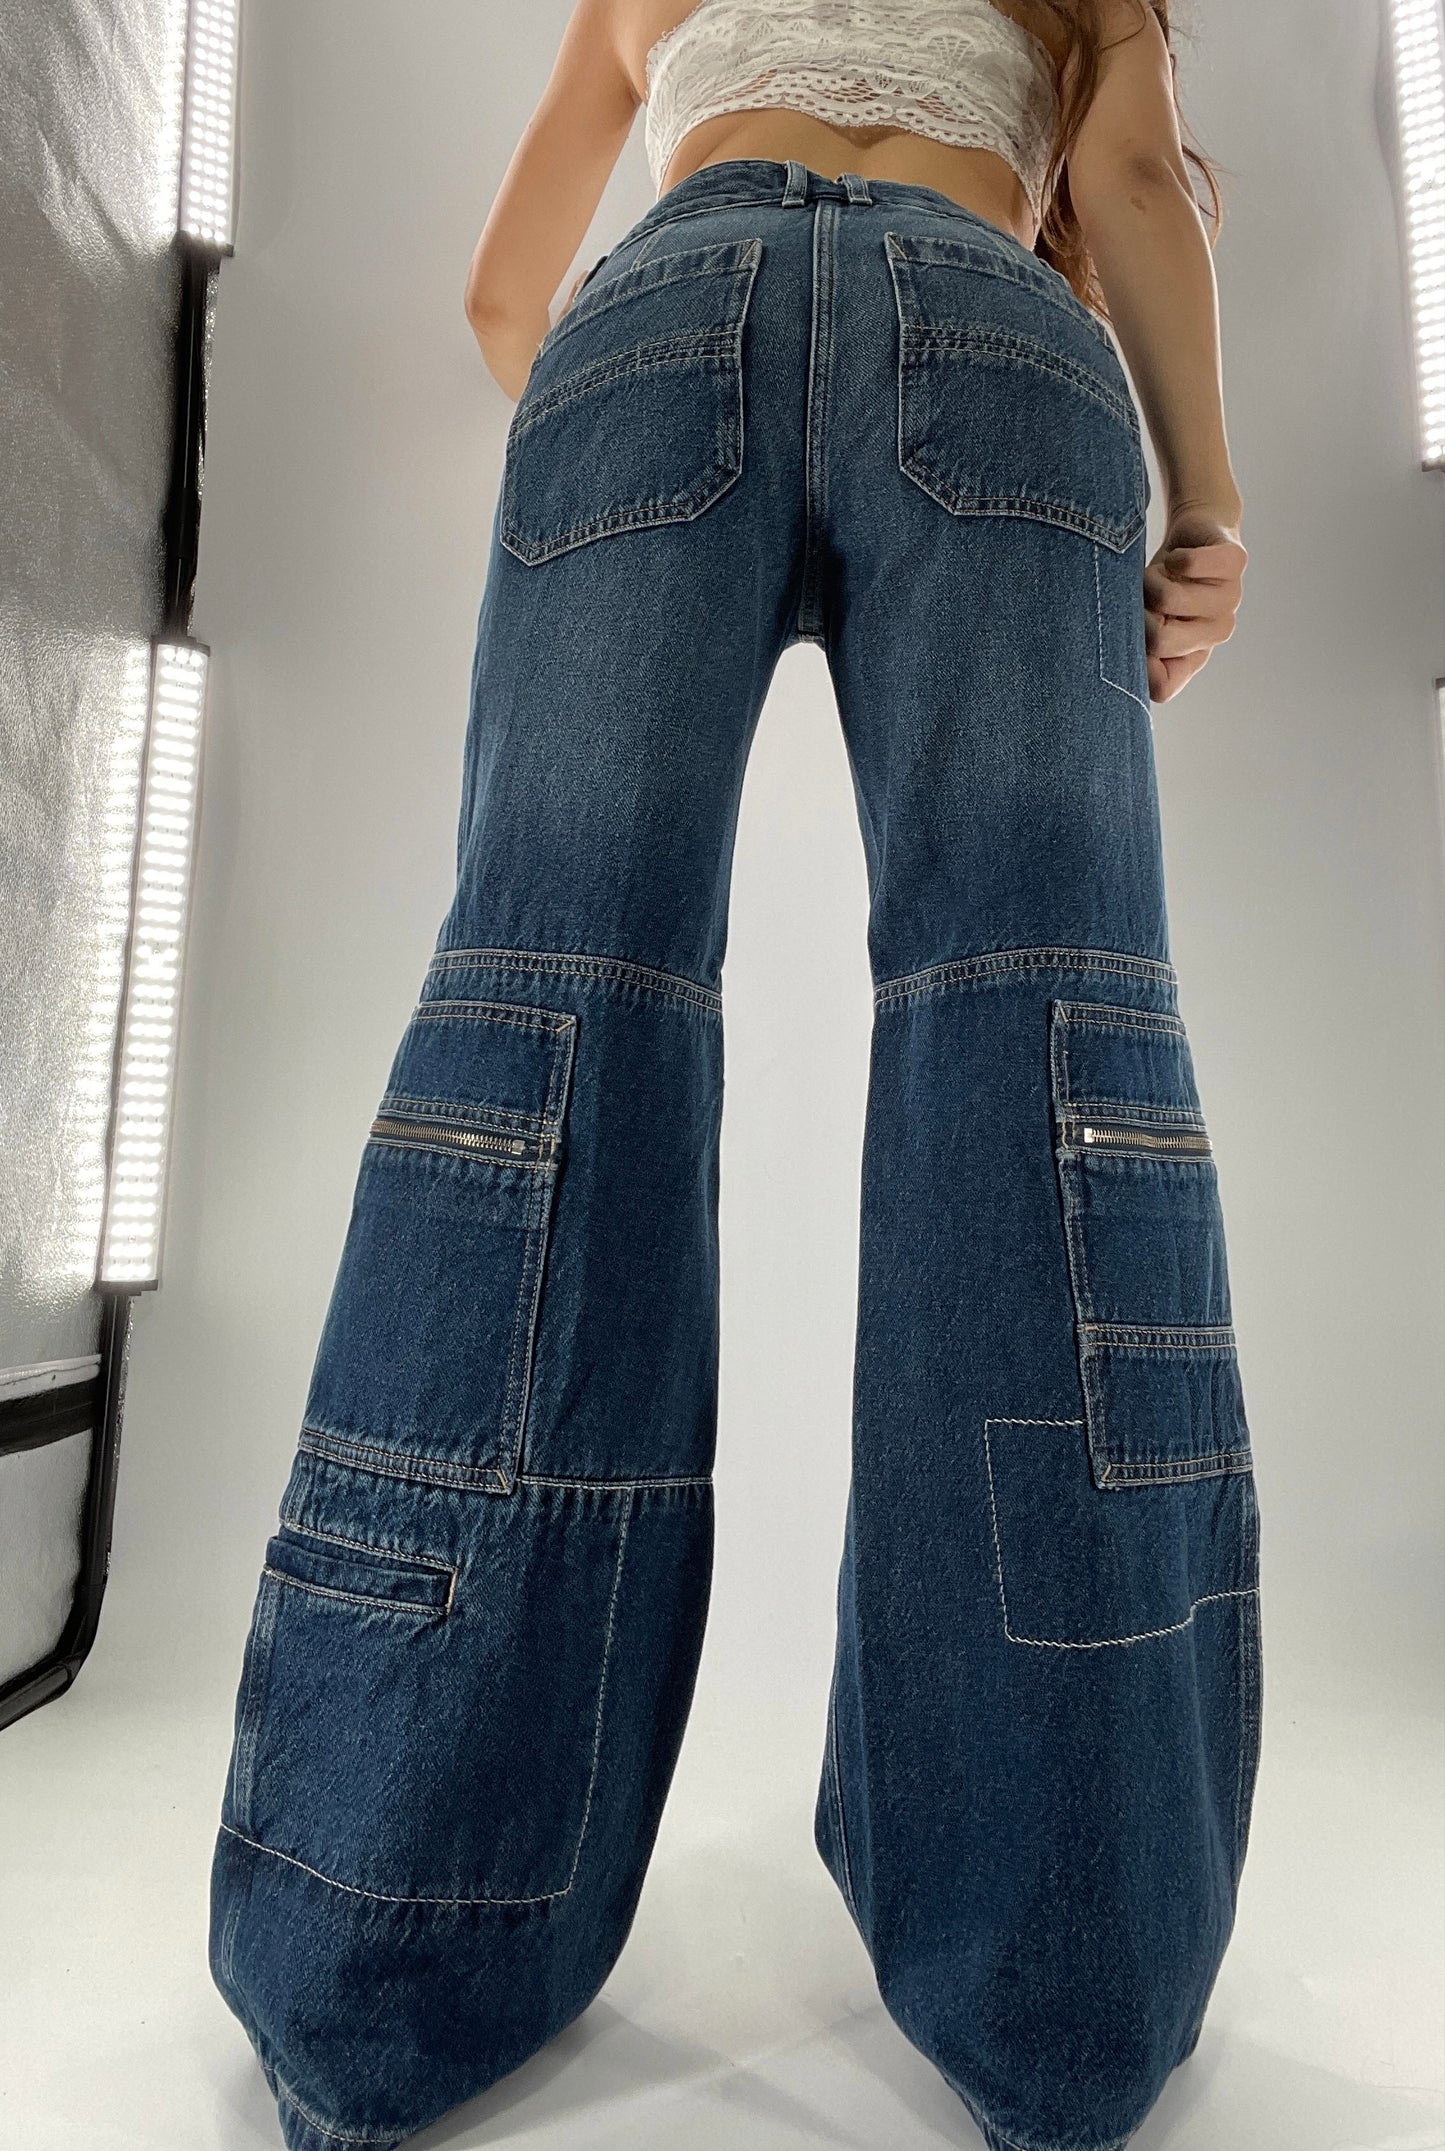 Free People Medium Wash Baggy Straight Legs Jeans Covered in Zippers, Pockets, Stitching (28)